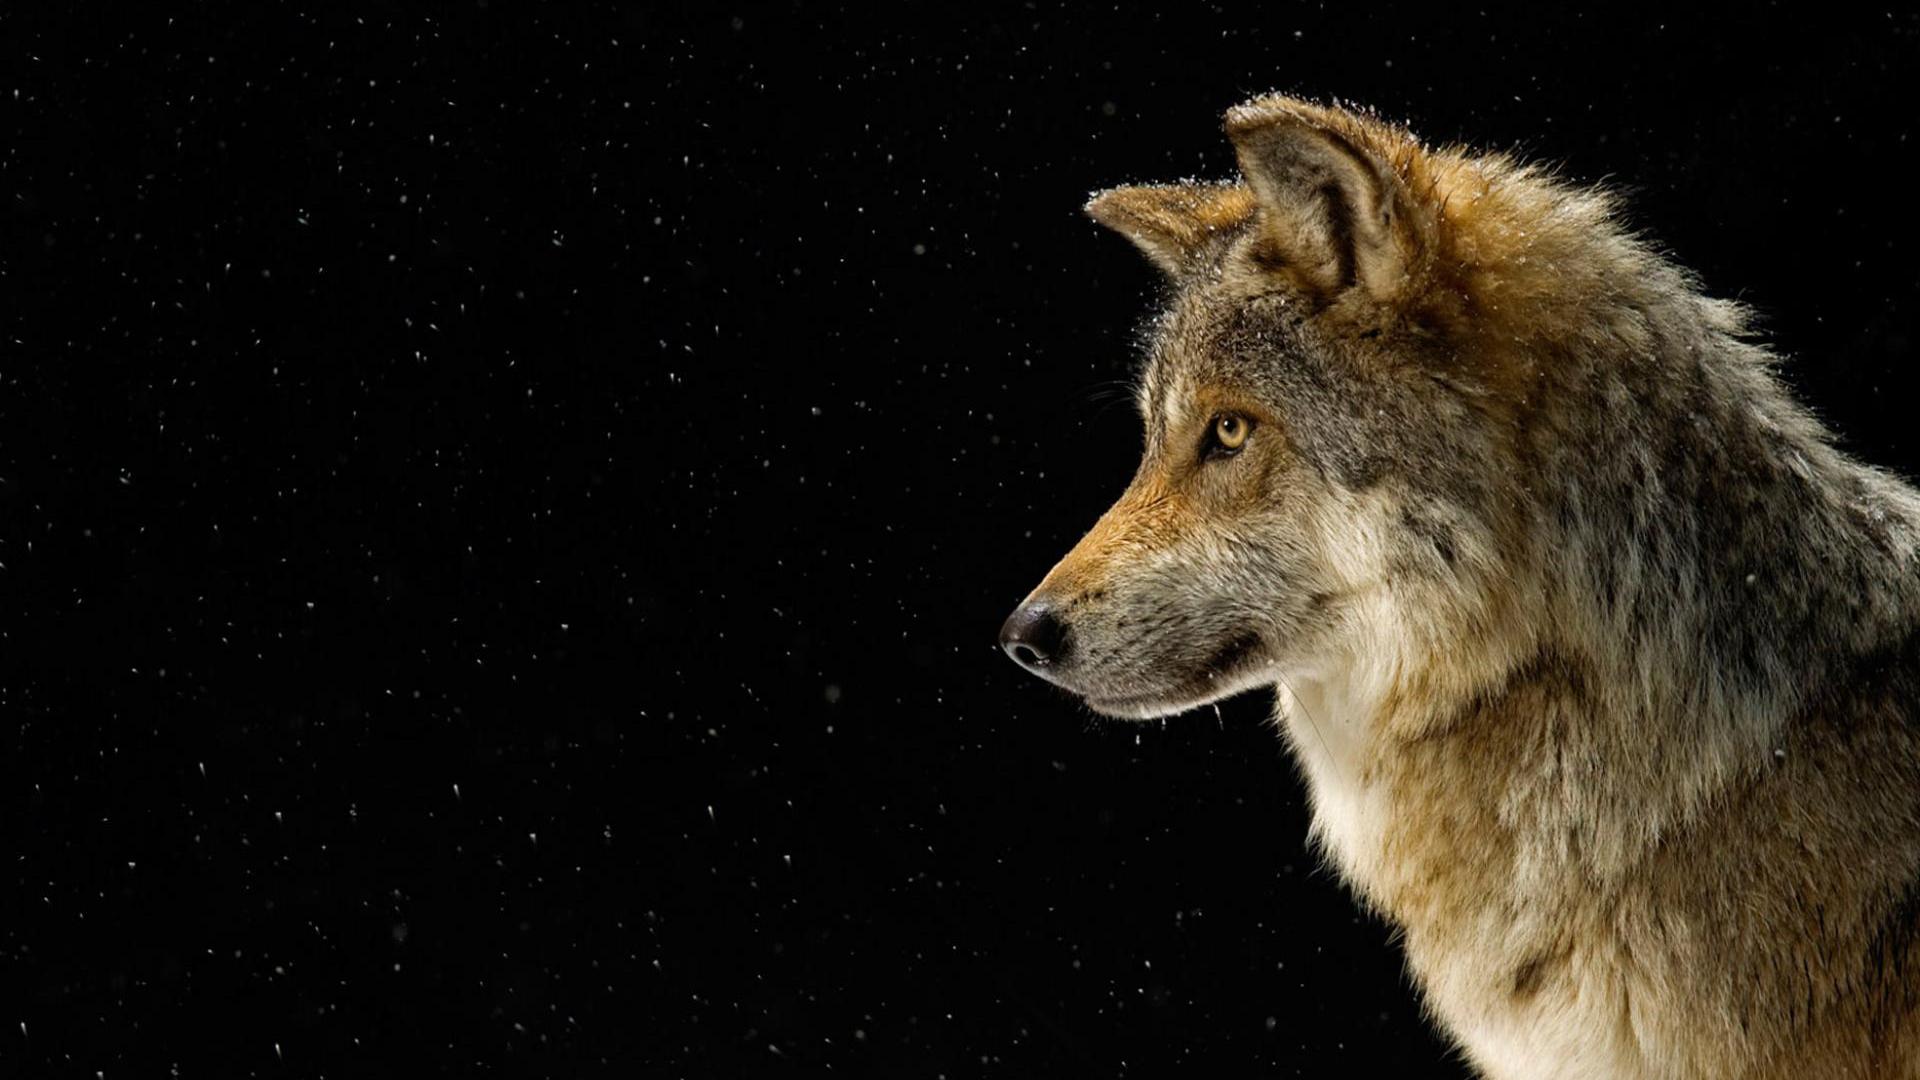 Wolf Black Wolf Pictures HD Wallpaper of Animals   hdwallpaper2013com